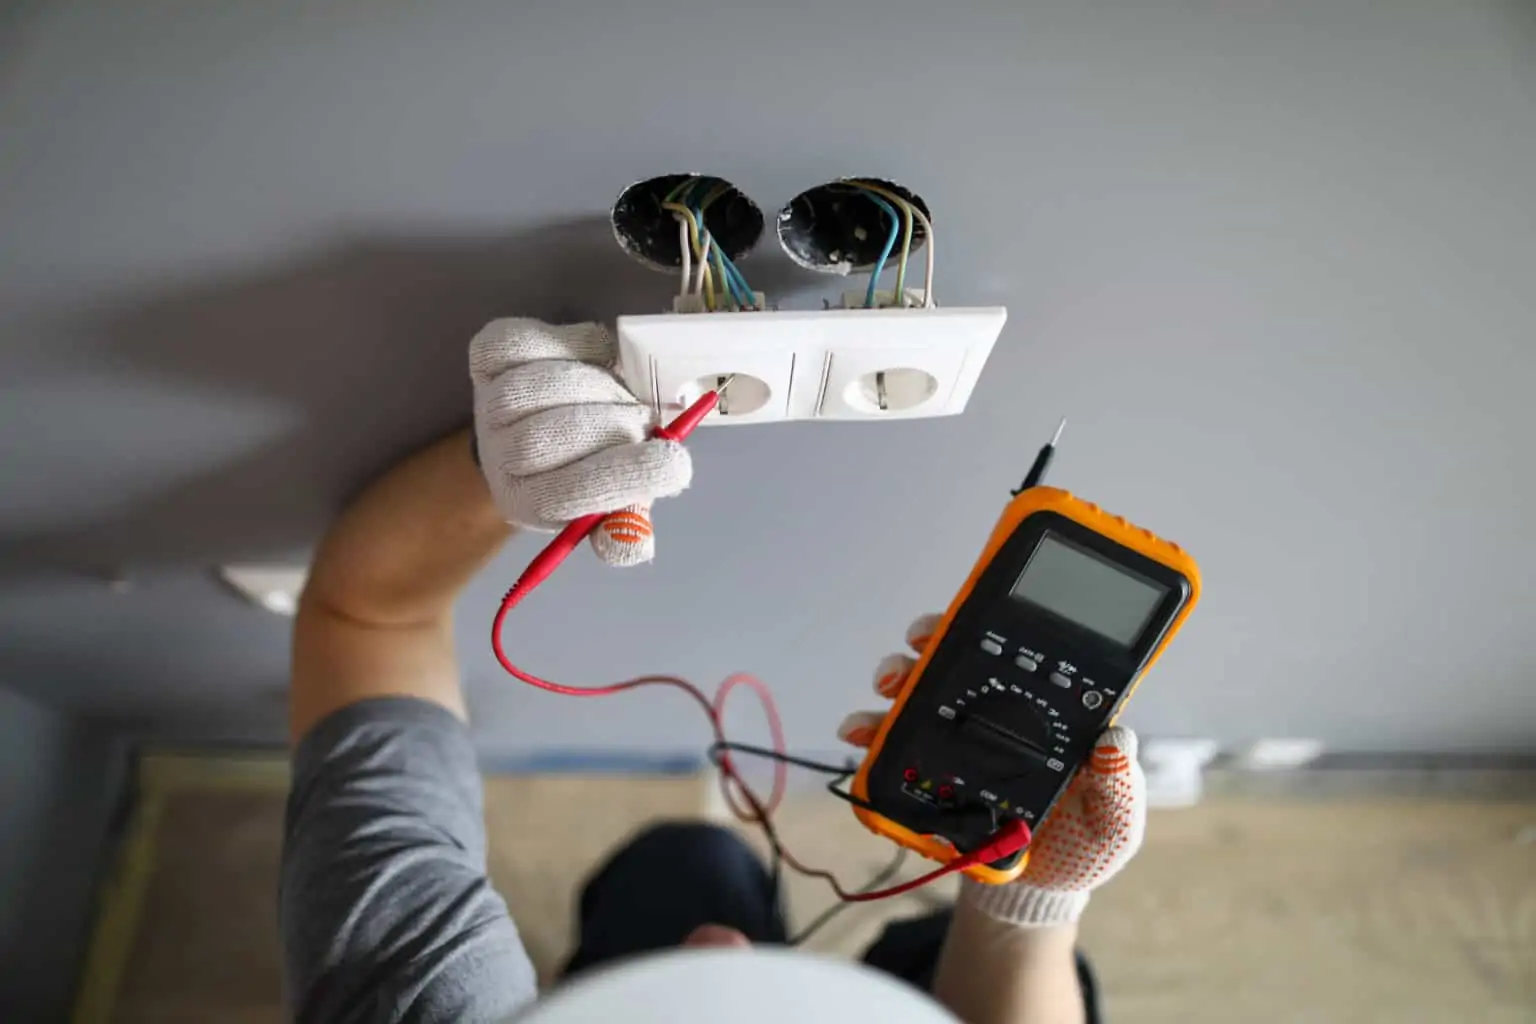 An electrician installing and testing a wall outlet